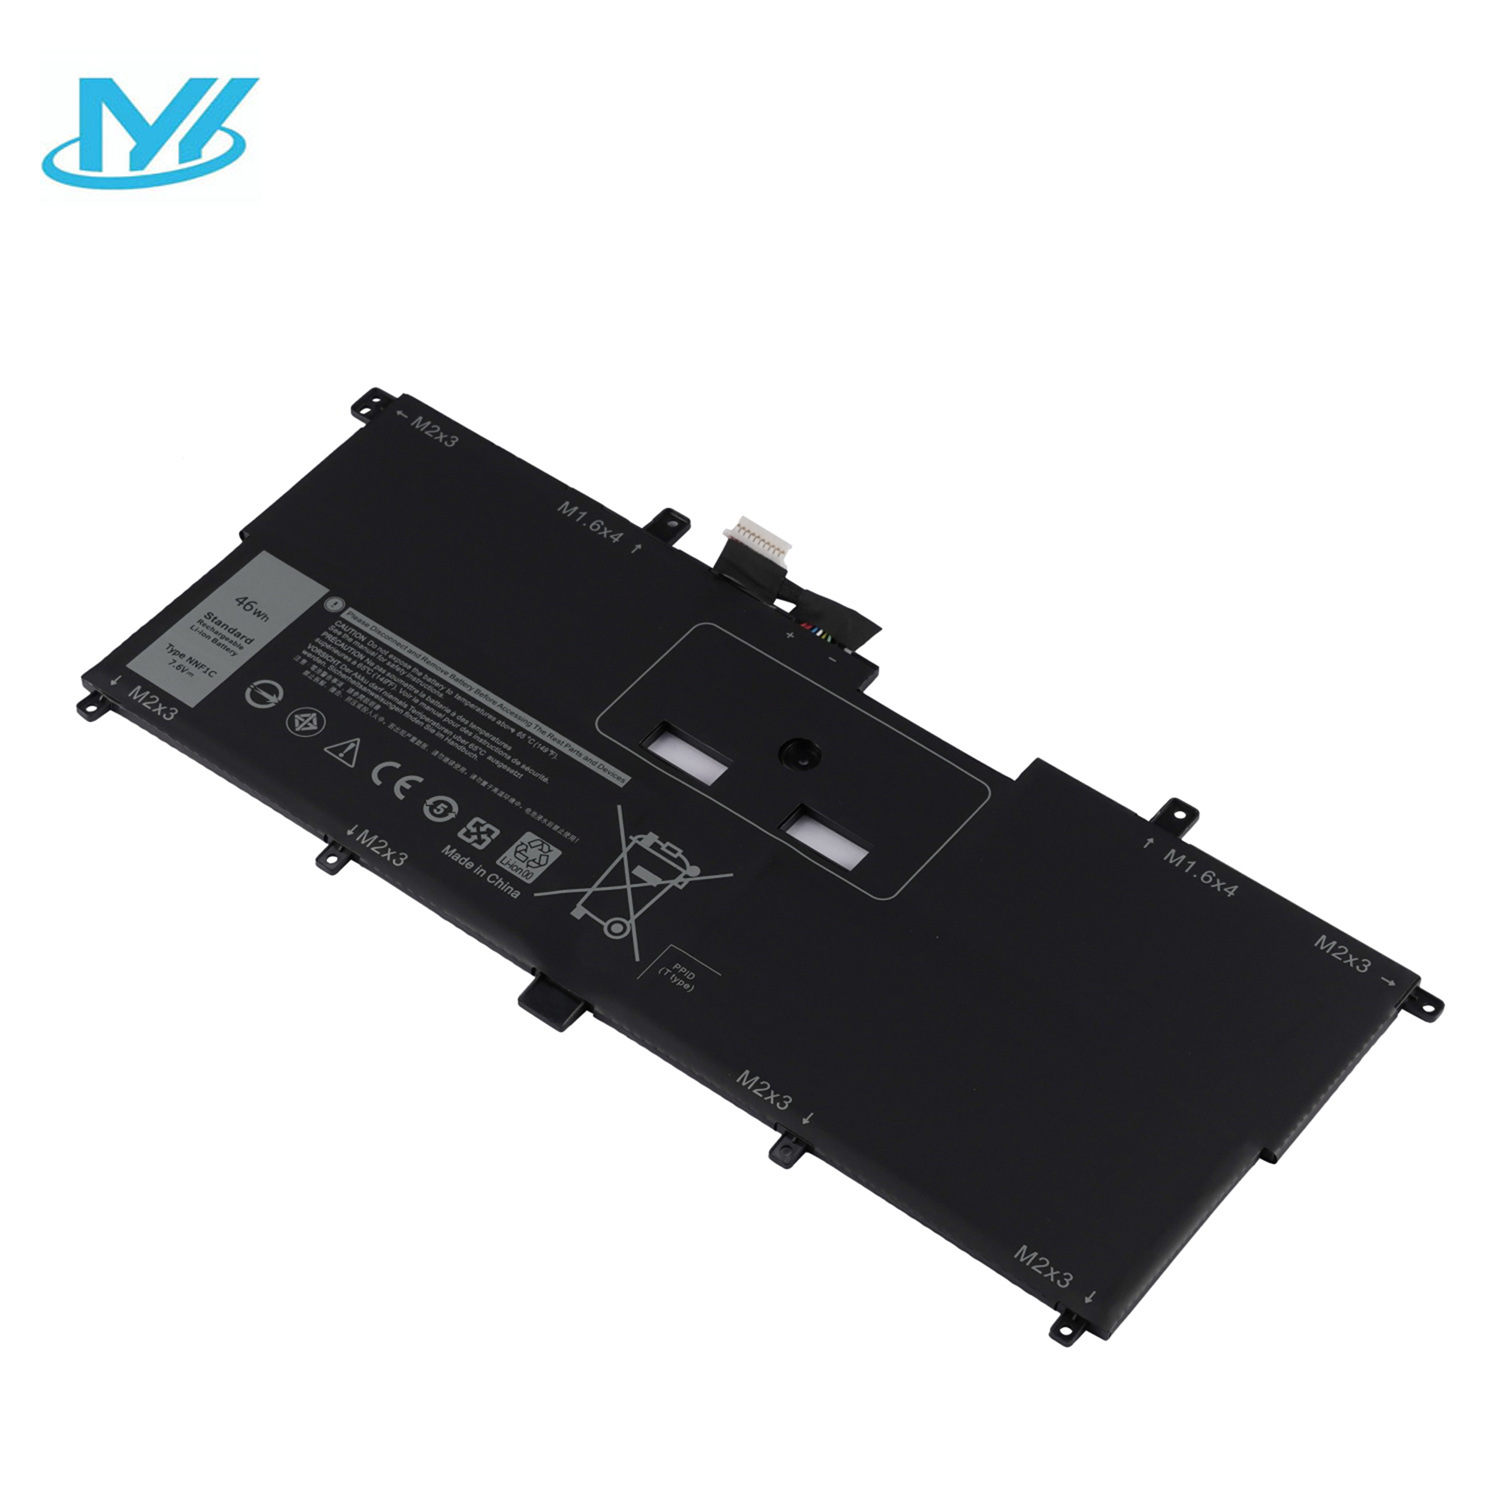 NNF1C HMPFH Battery for Dell XPS 13 9365 Series, XPS 13-9365-D1605TS 13-9365-D1805TS 13-9365-D2805TS 13-9365-D3605TS Laptop